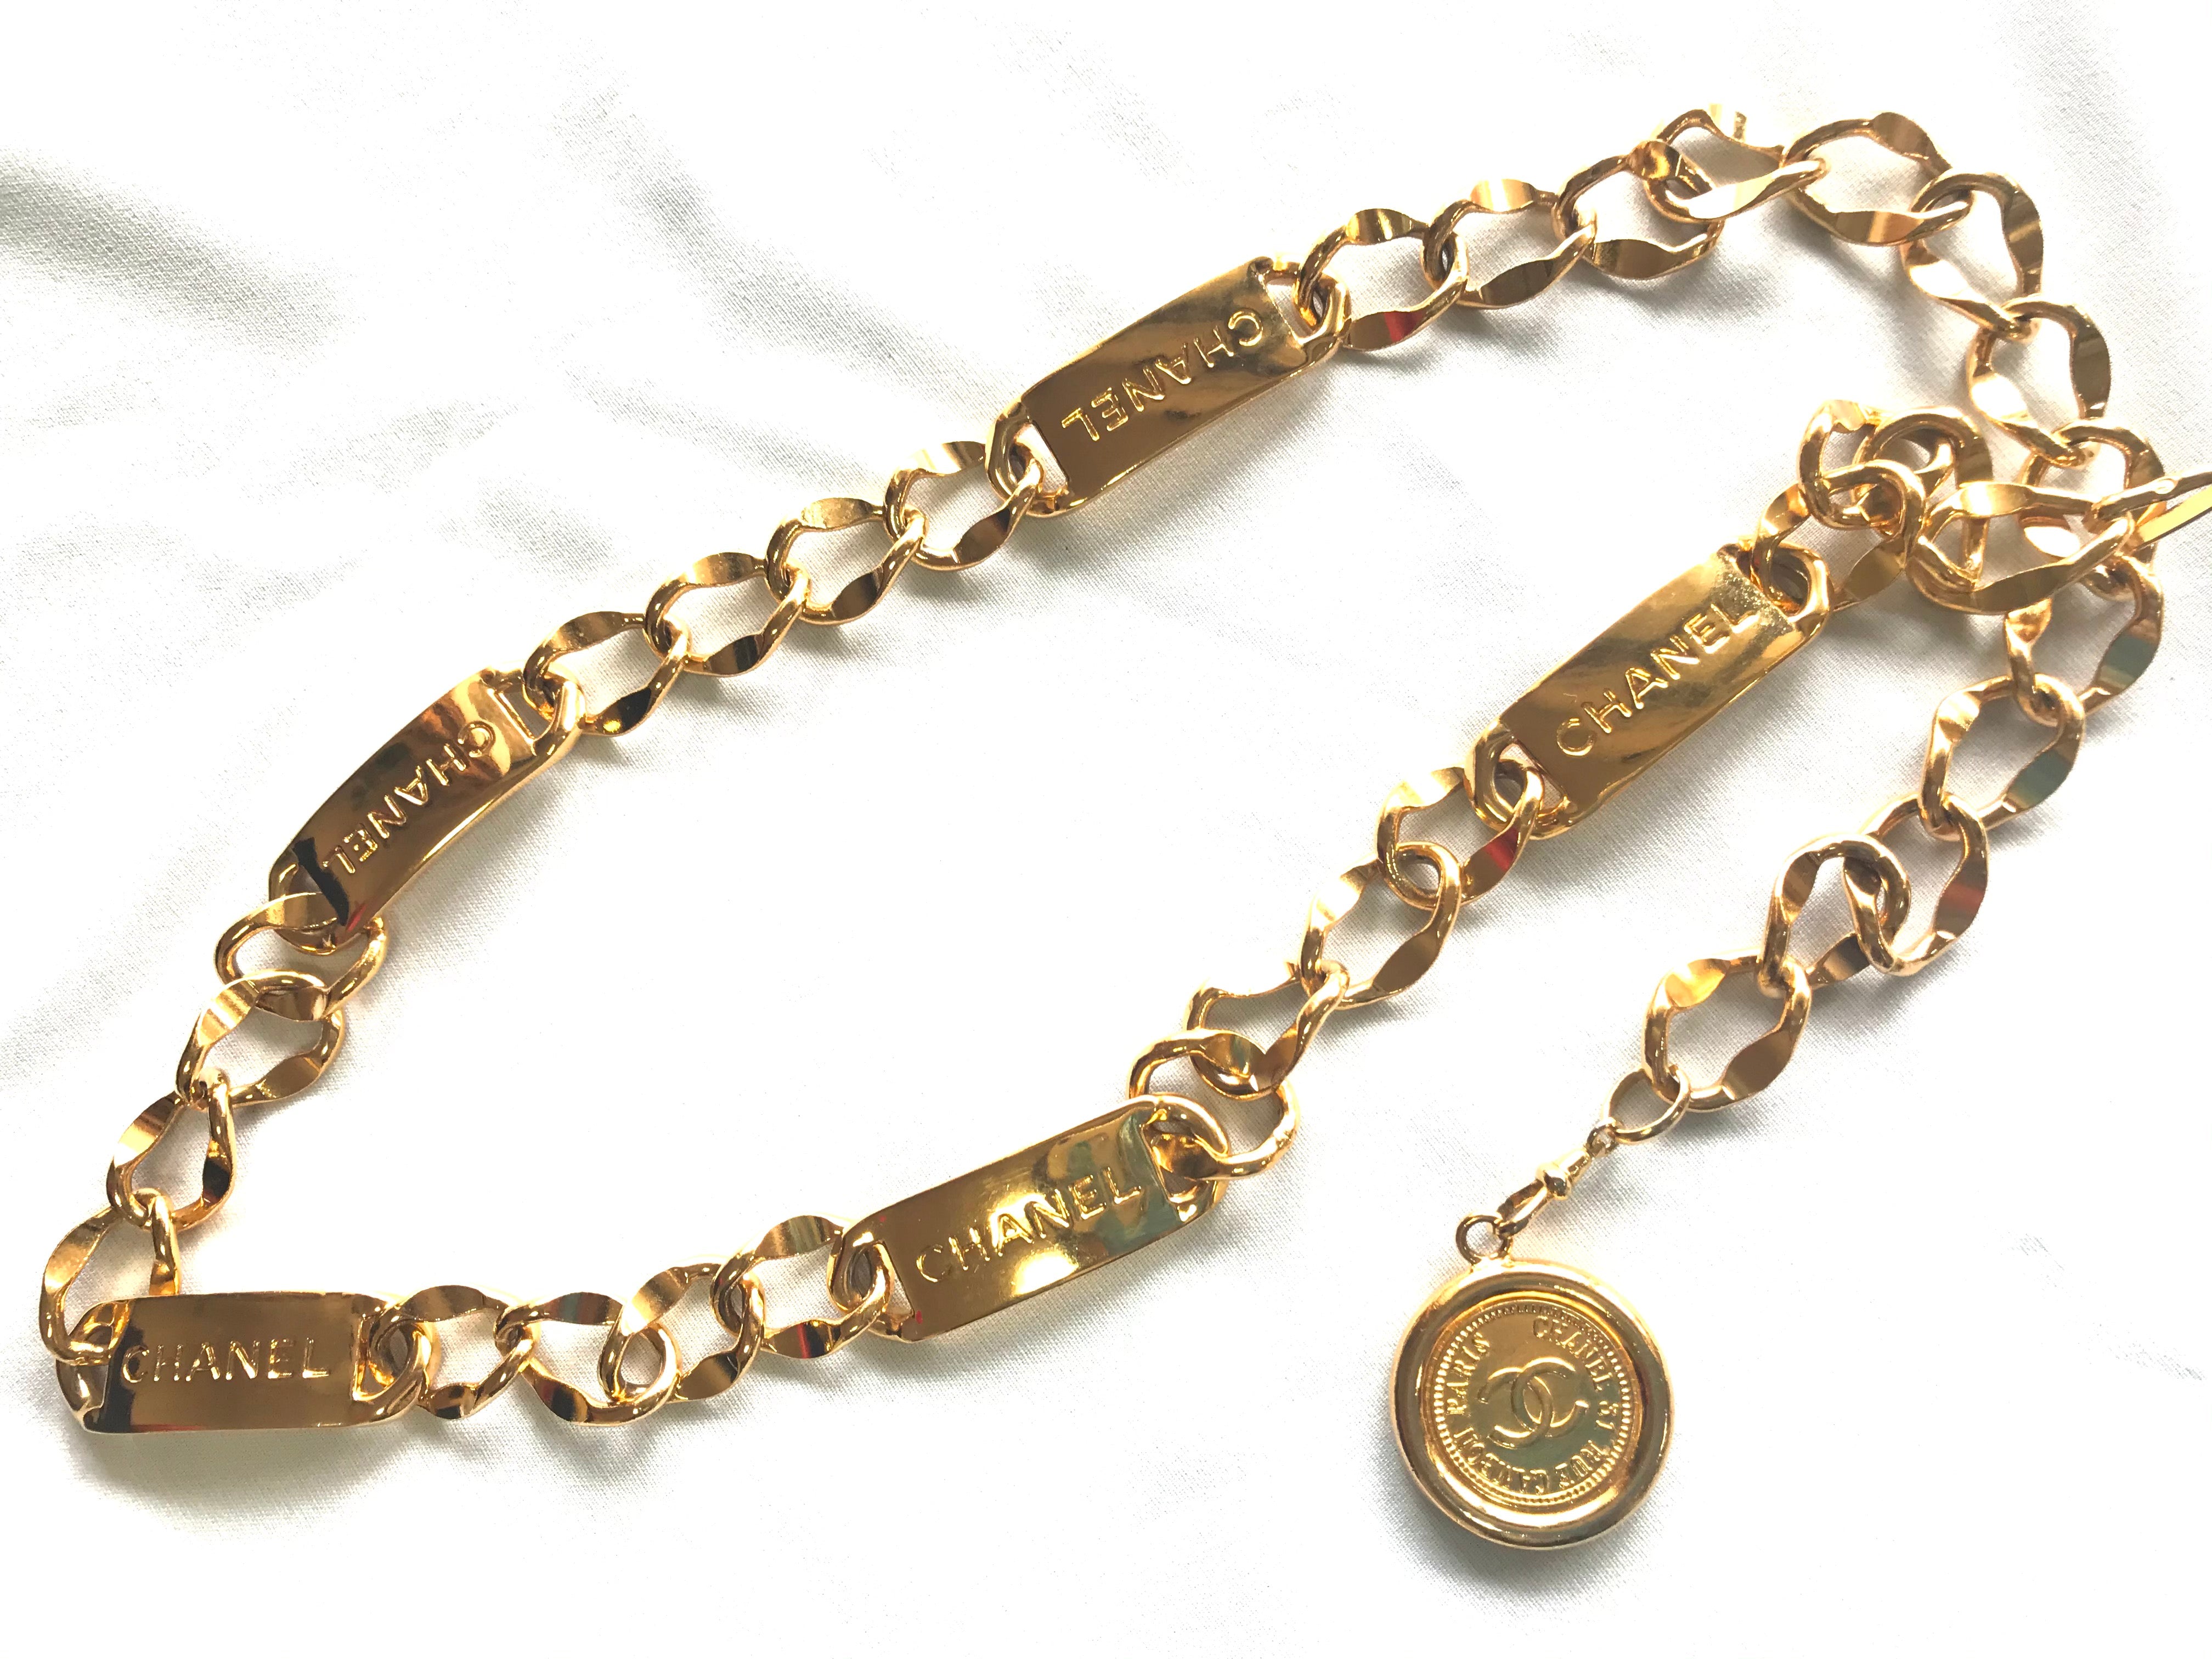 Vintage CHANEL nice and heavy thick golden chain belt with large